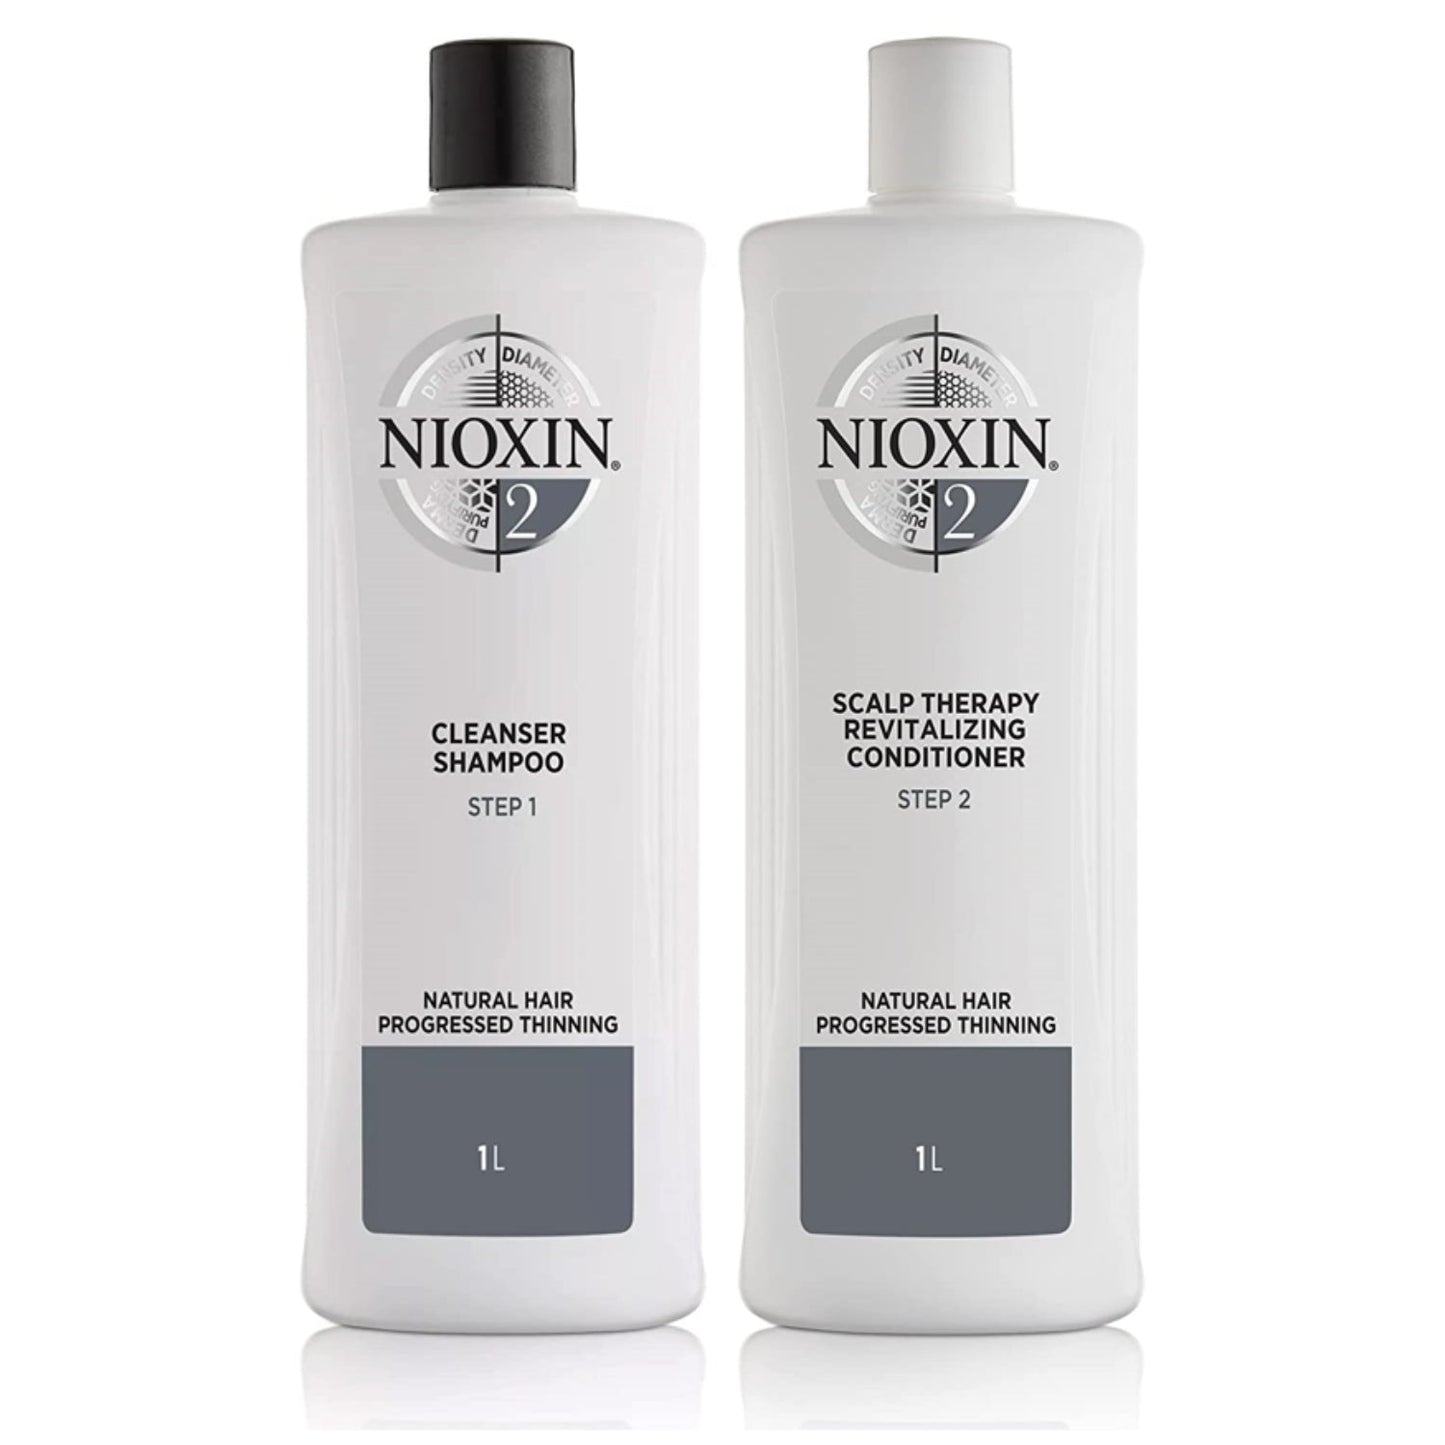 Duo Nioxin System 2 Litre